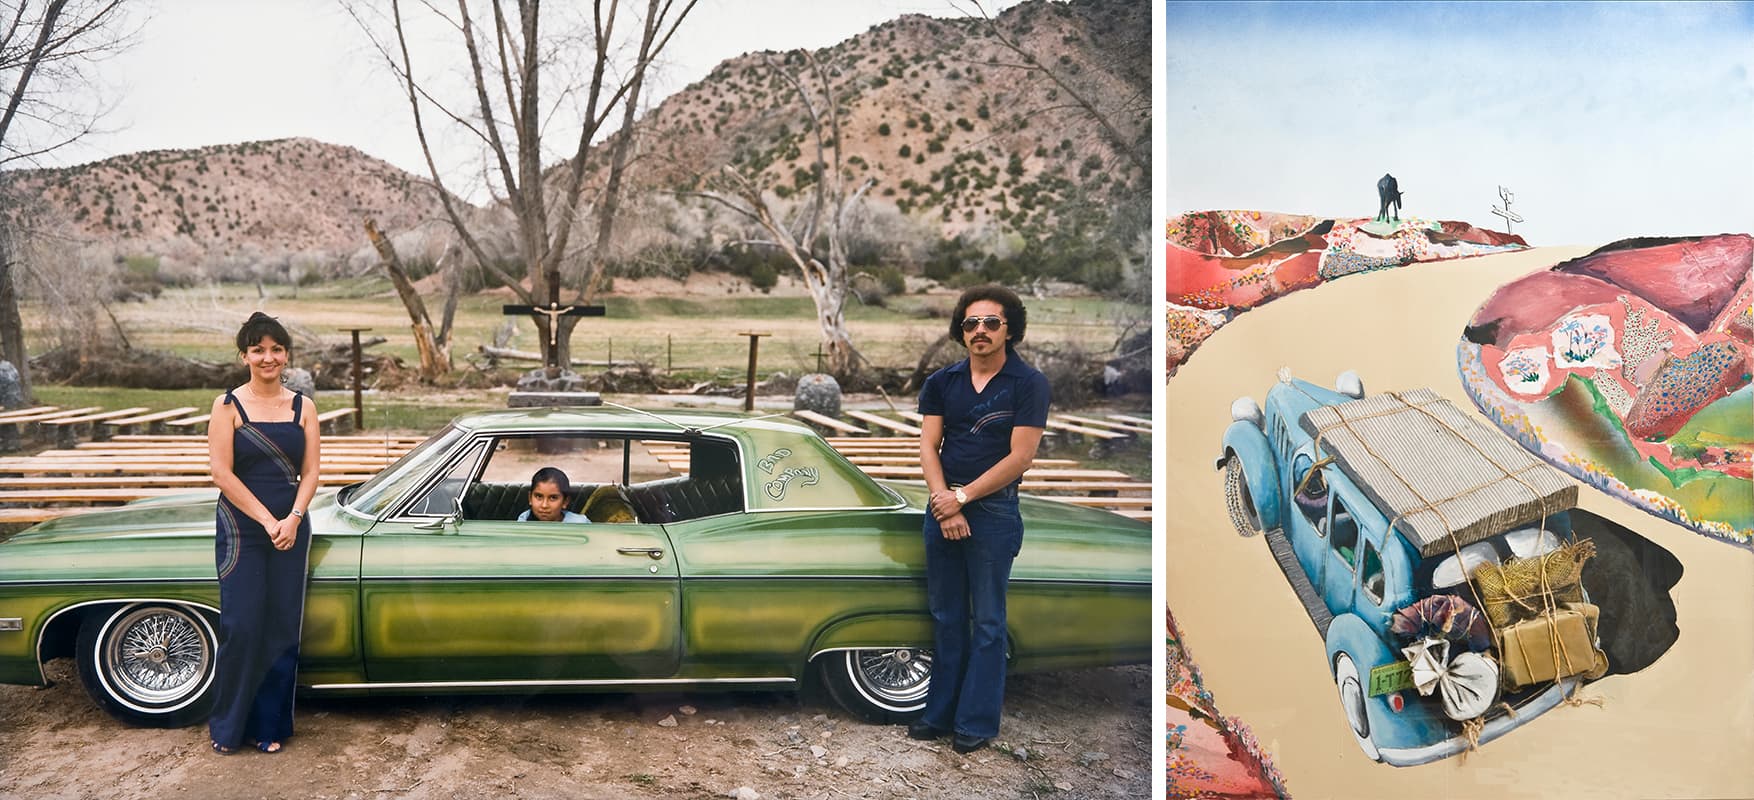 Left to right: Meridel Rubenstein, &quot;Paul, Annabelle, &amp; Paul Medina, Chimayo 68 Chevy Impala.&quot; Benny Andrews, &quot;Northbound,&quot; 1996. (Courtesy of Terry and Eva Herndon/Fitchburg Art Museum)